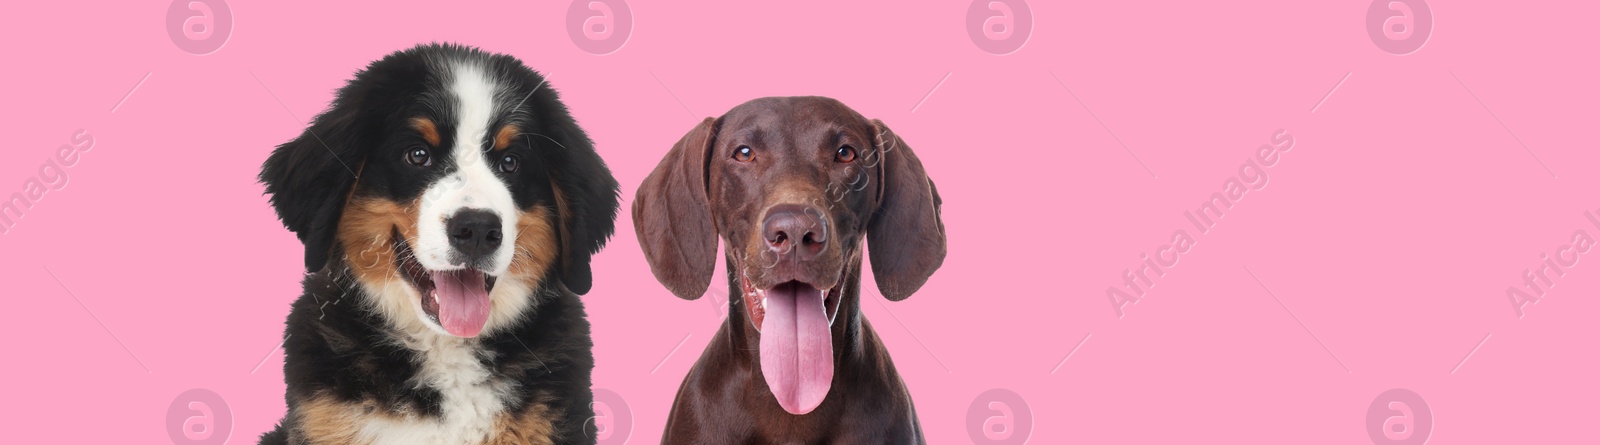 Image of Cute Bernese Mountain Dog puppy smiling and happy German Shorthaired Pointer on pink background, banner design. Space for text